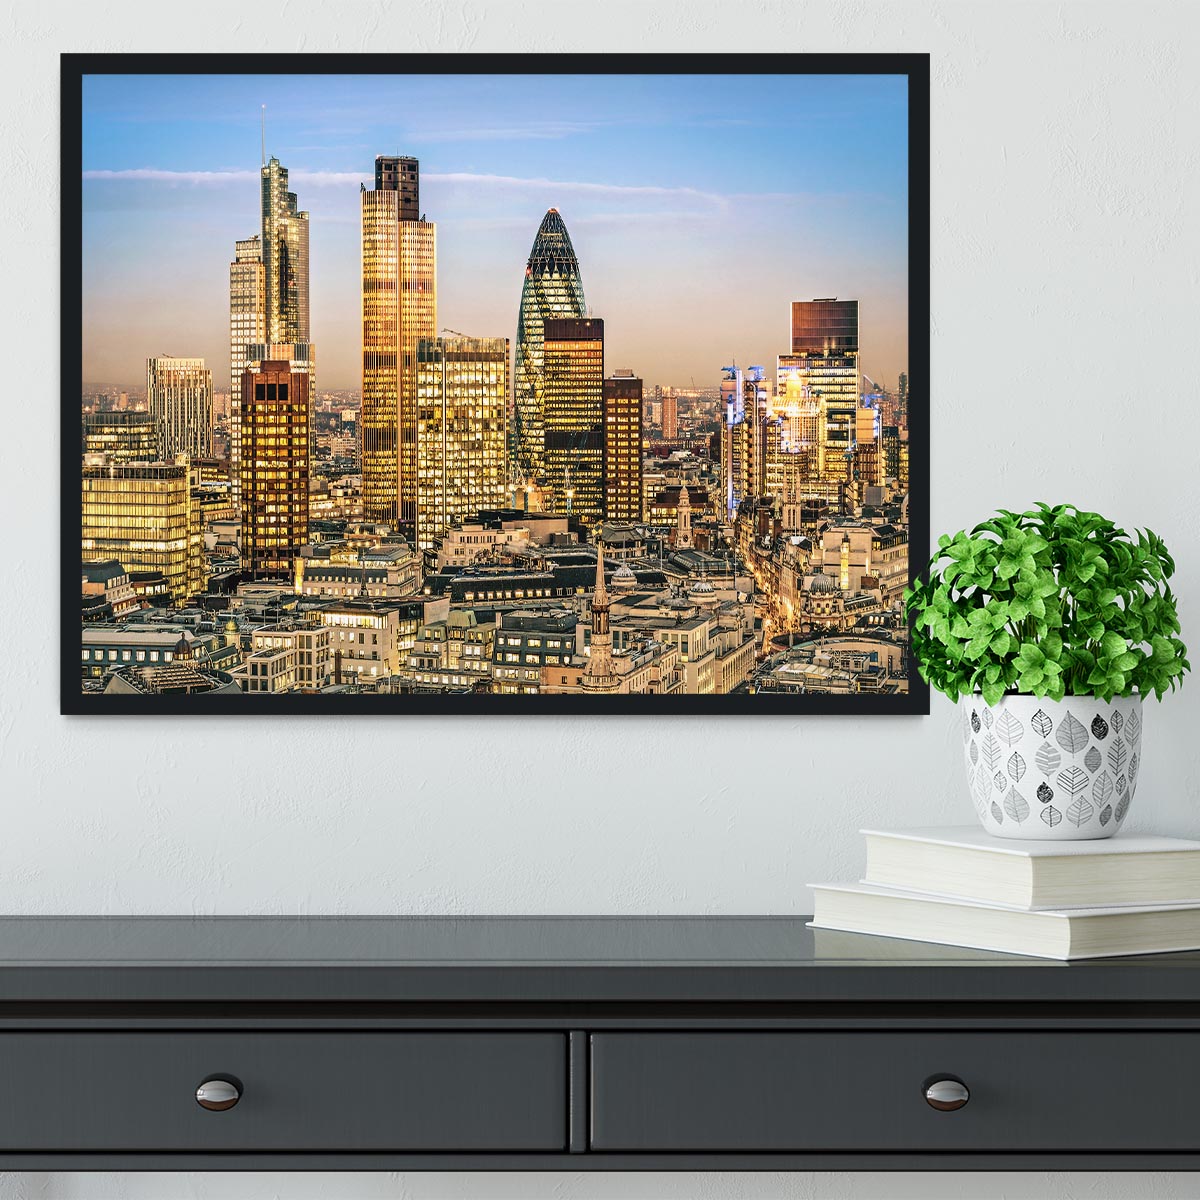 Stock Exchange Tower and Lloyds of London Framed Print - Canvas Art Rocks - 2